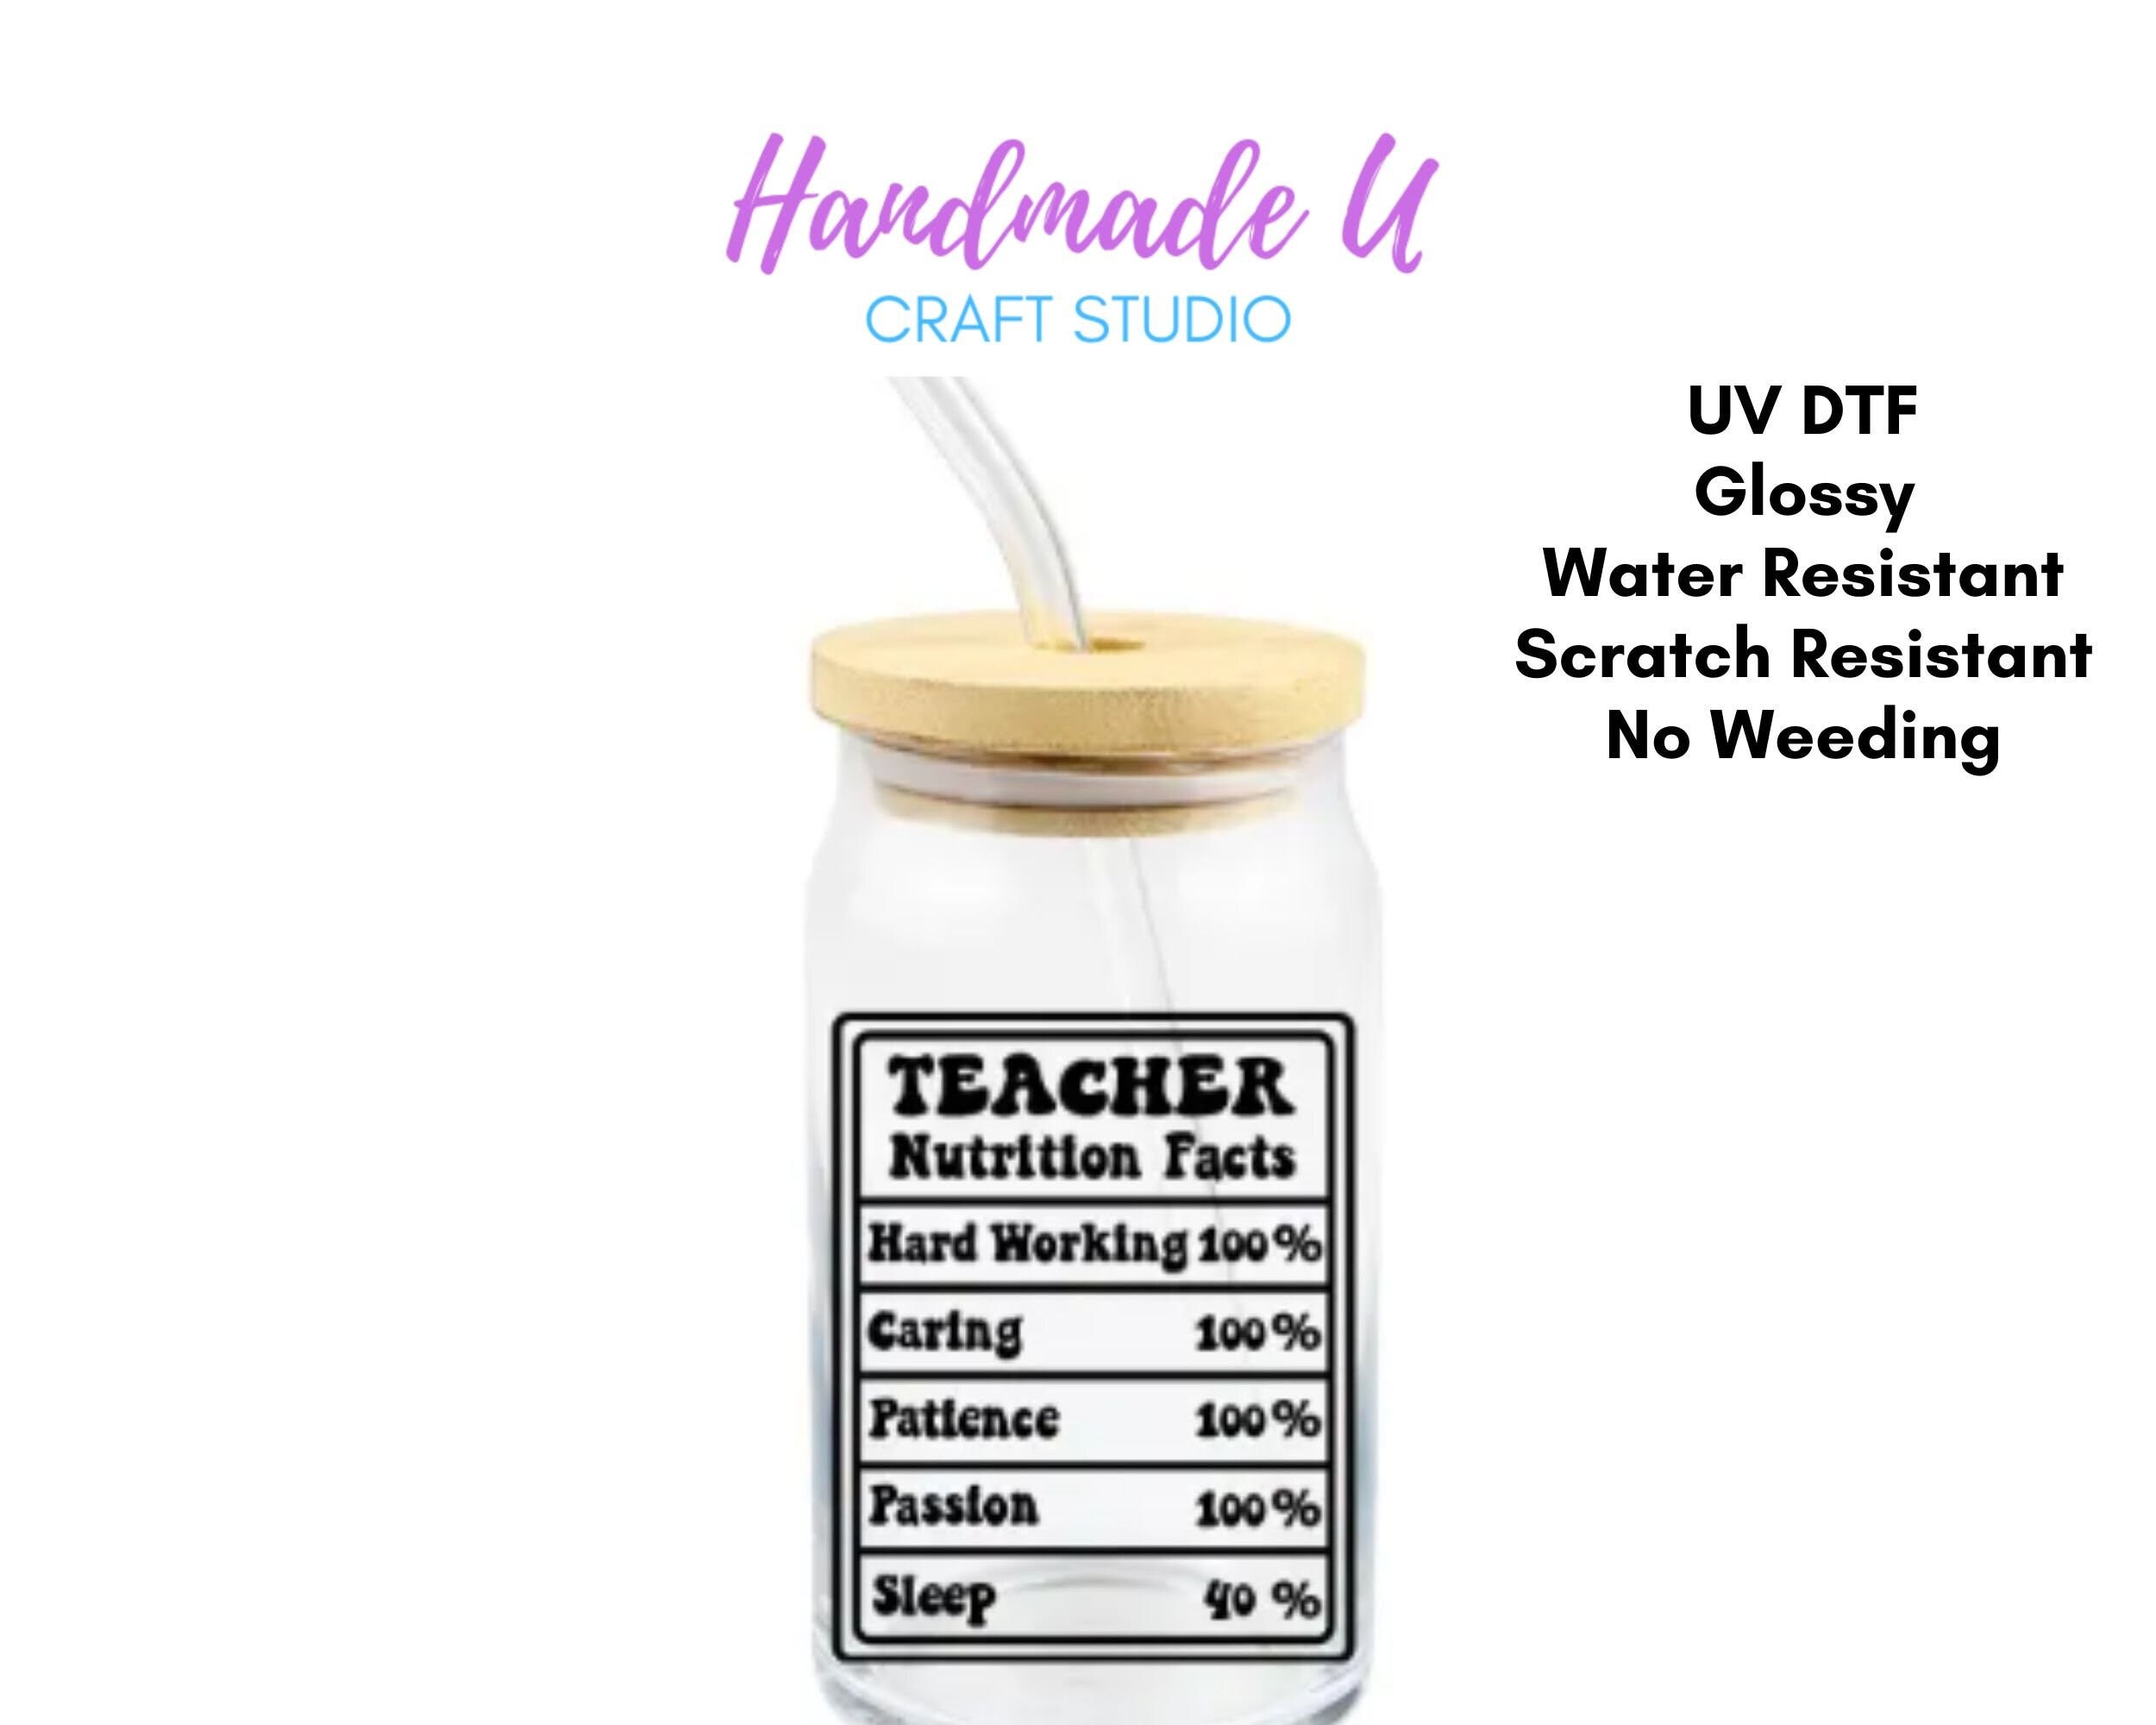 UV DTF Teacher Nutrition Facts 16 oz. glass can wrap   | Ready to Apply | No Heat Needed | Permanent Adhesive | Waterproof